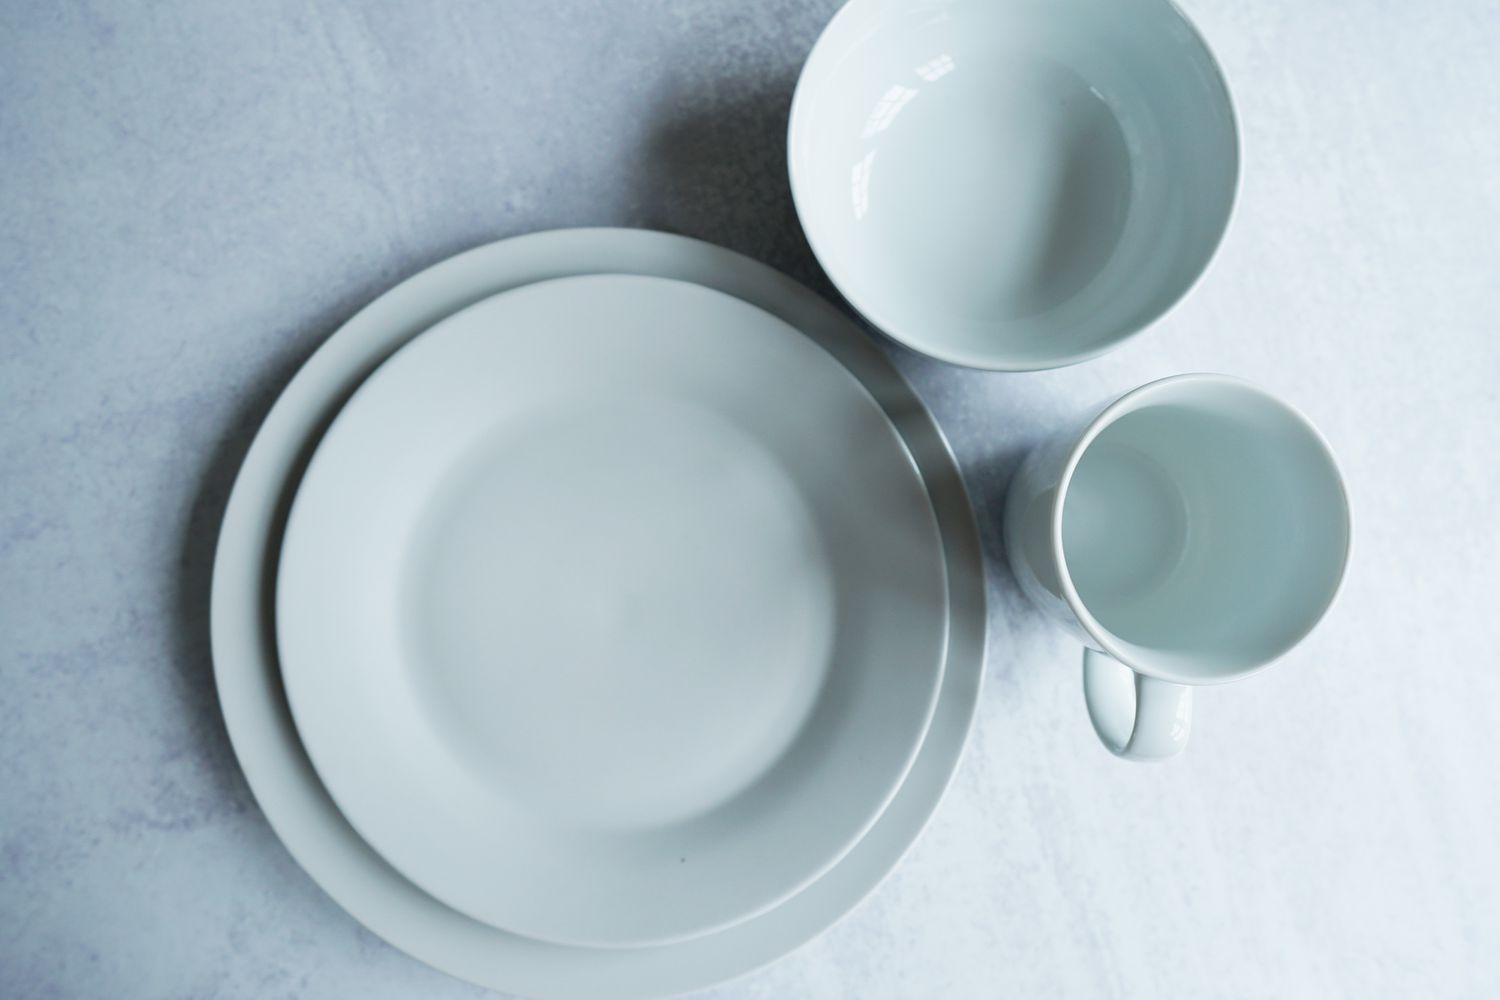 a white dinnerware set on a grey surface